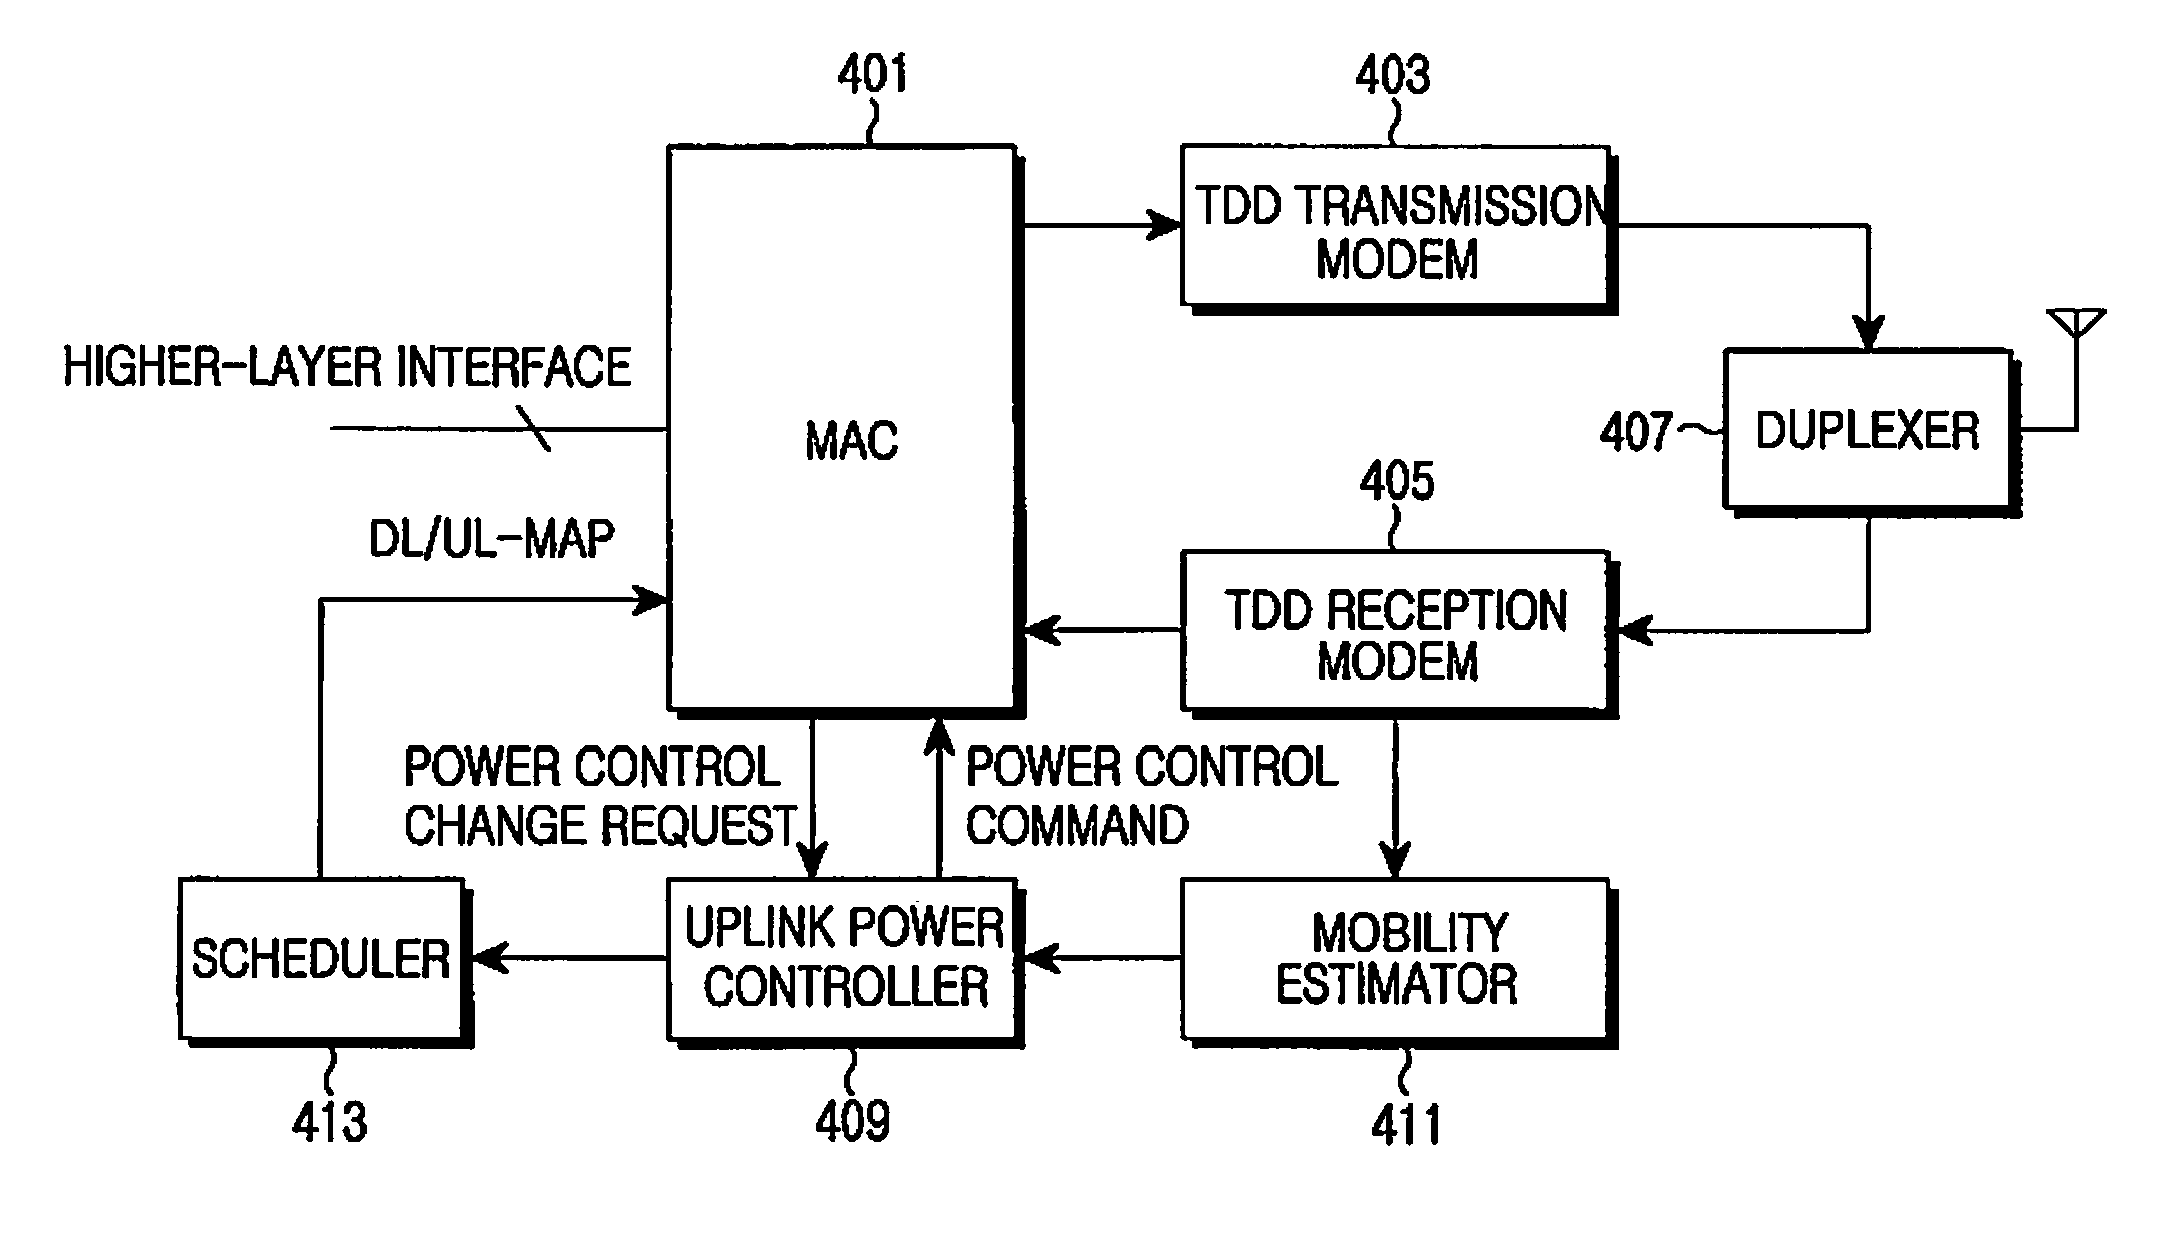 Apparatus and method for adaptively changing uplink power control scheme according to mobile status in a TDD mobile communication system